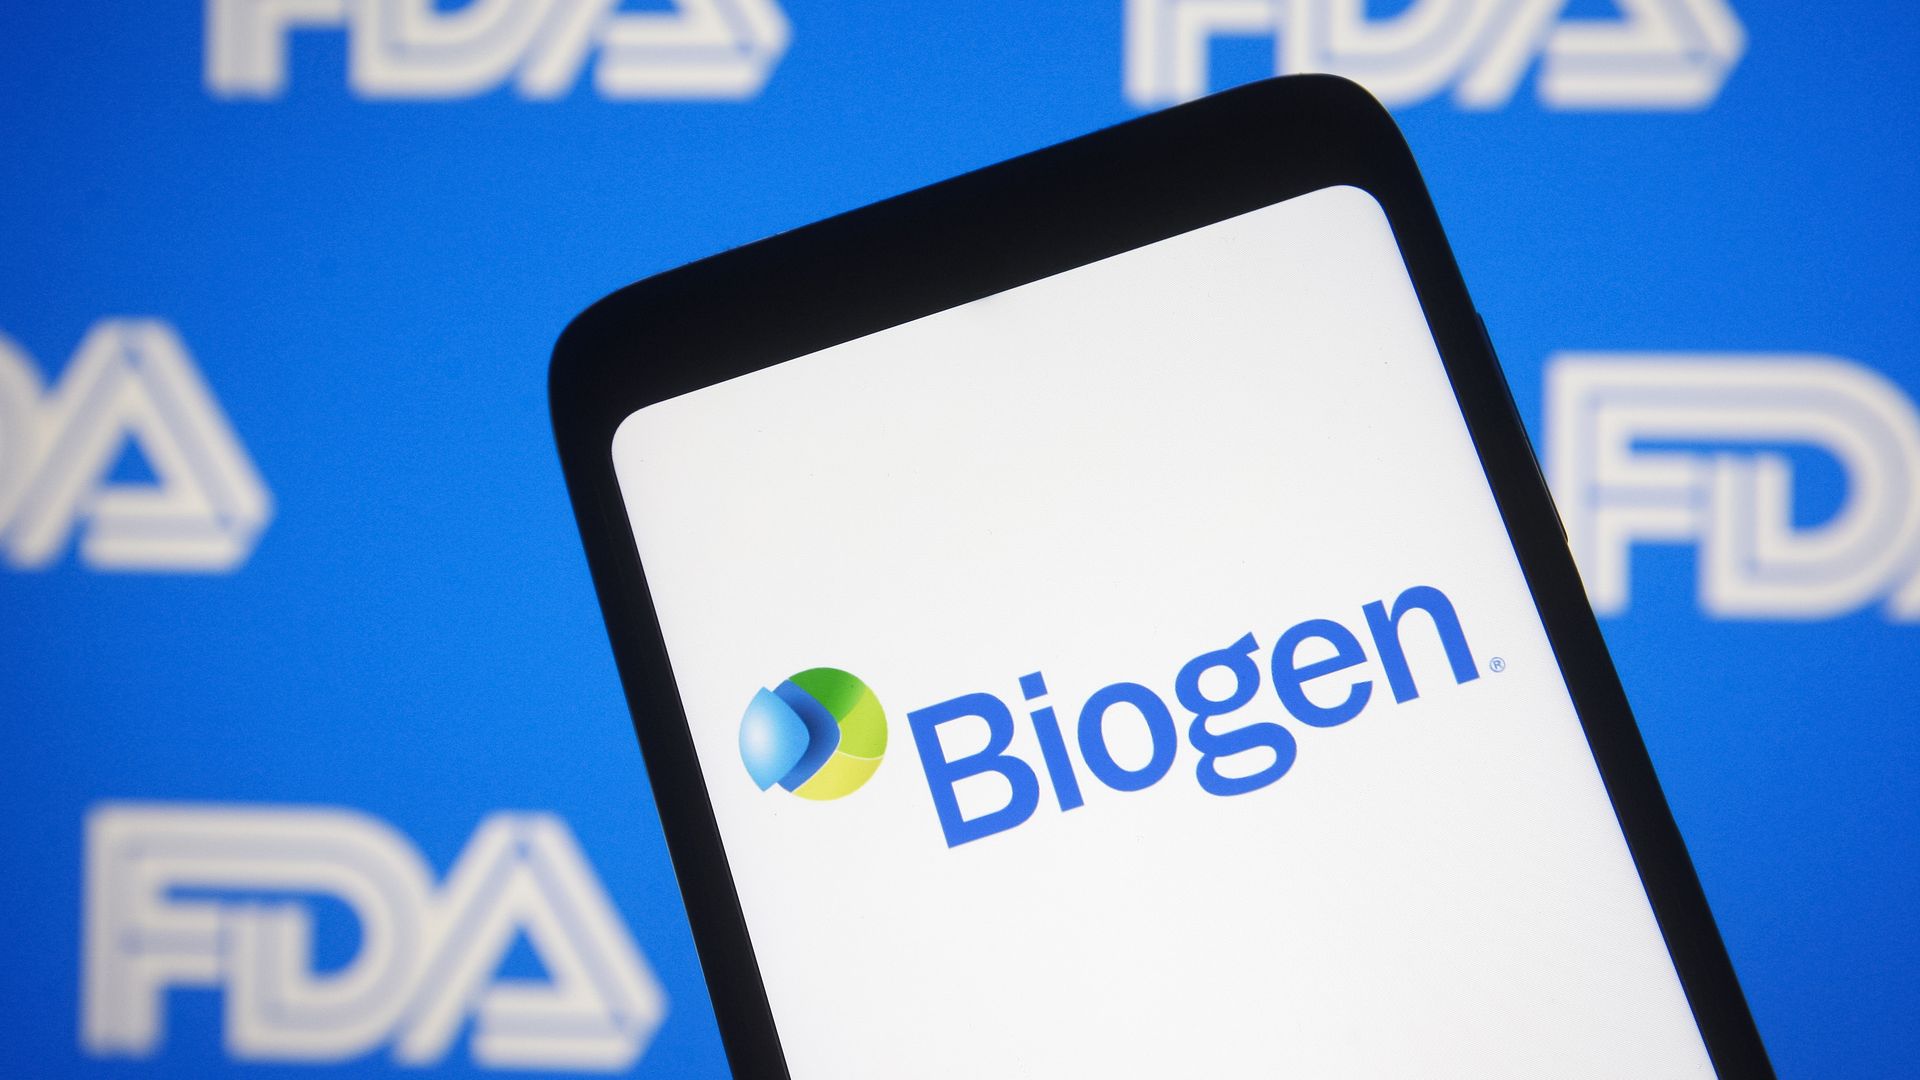 An image of the Biogen logo on a smart phone in front of the FDA logo in the background.